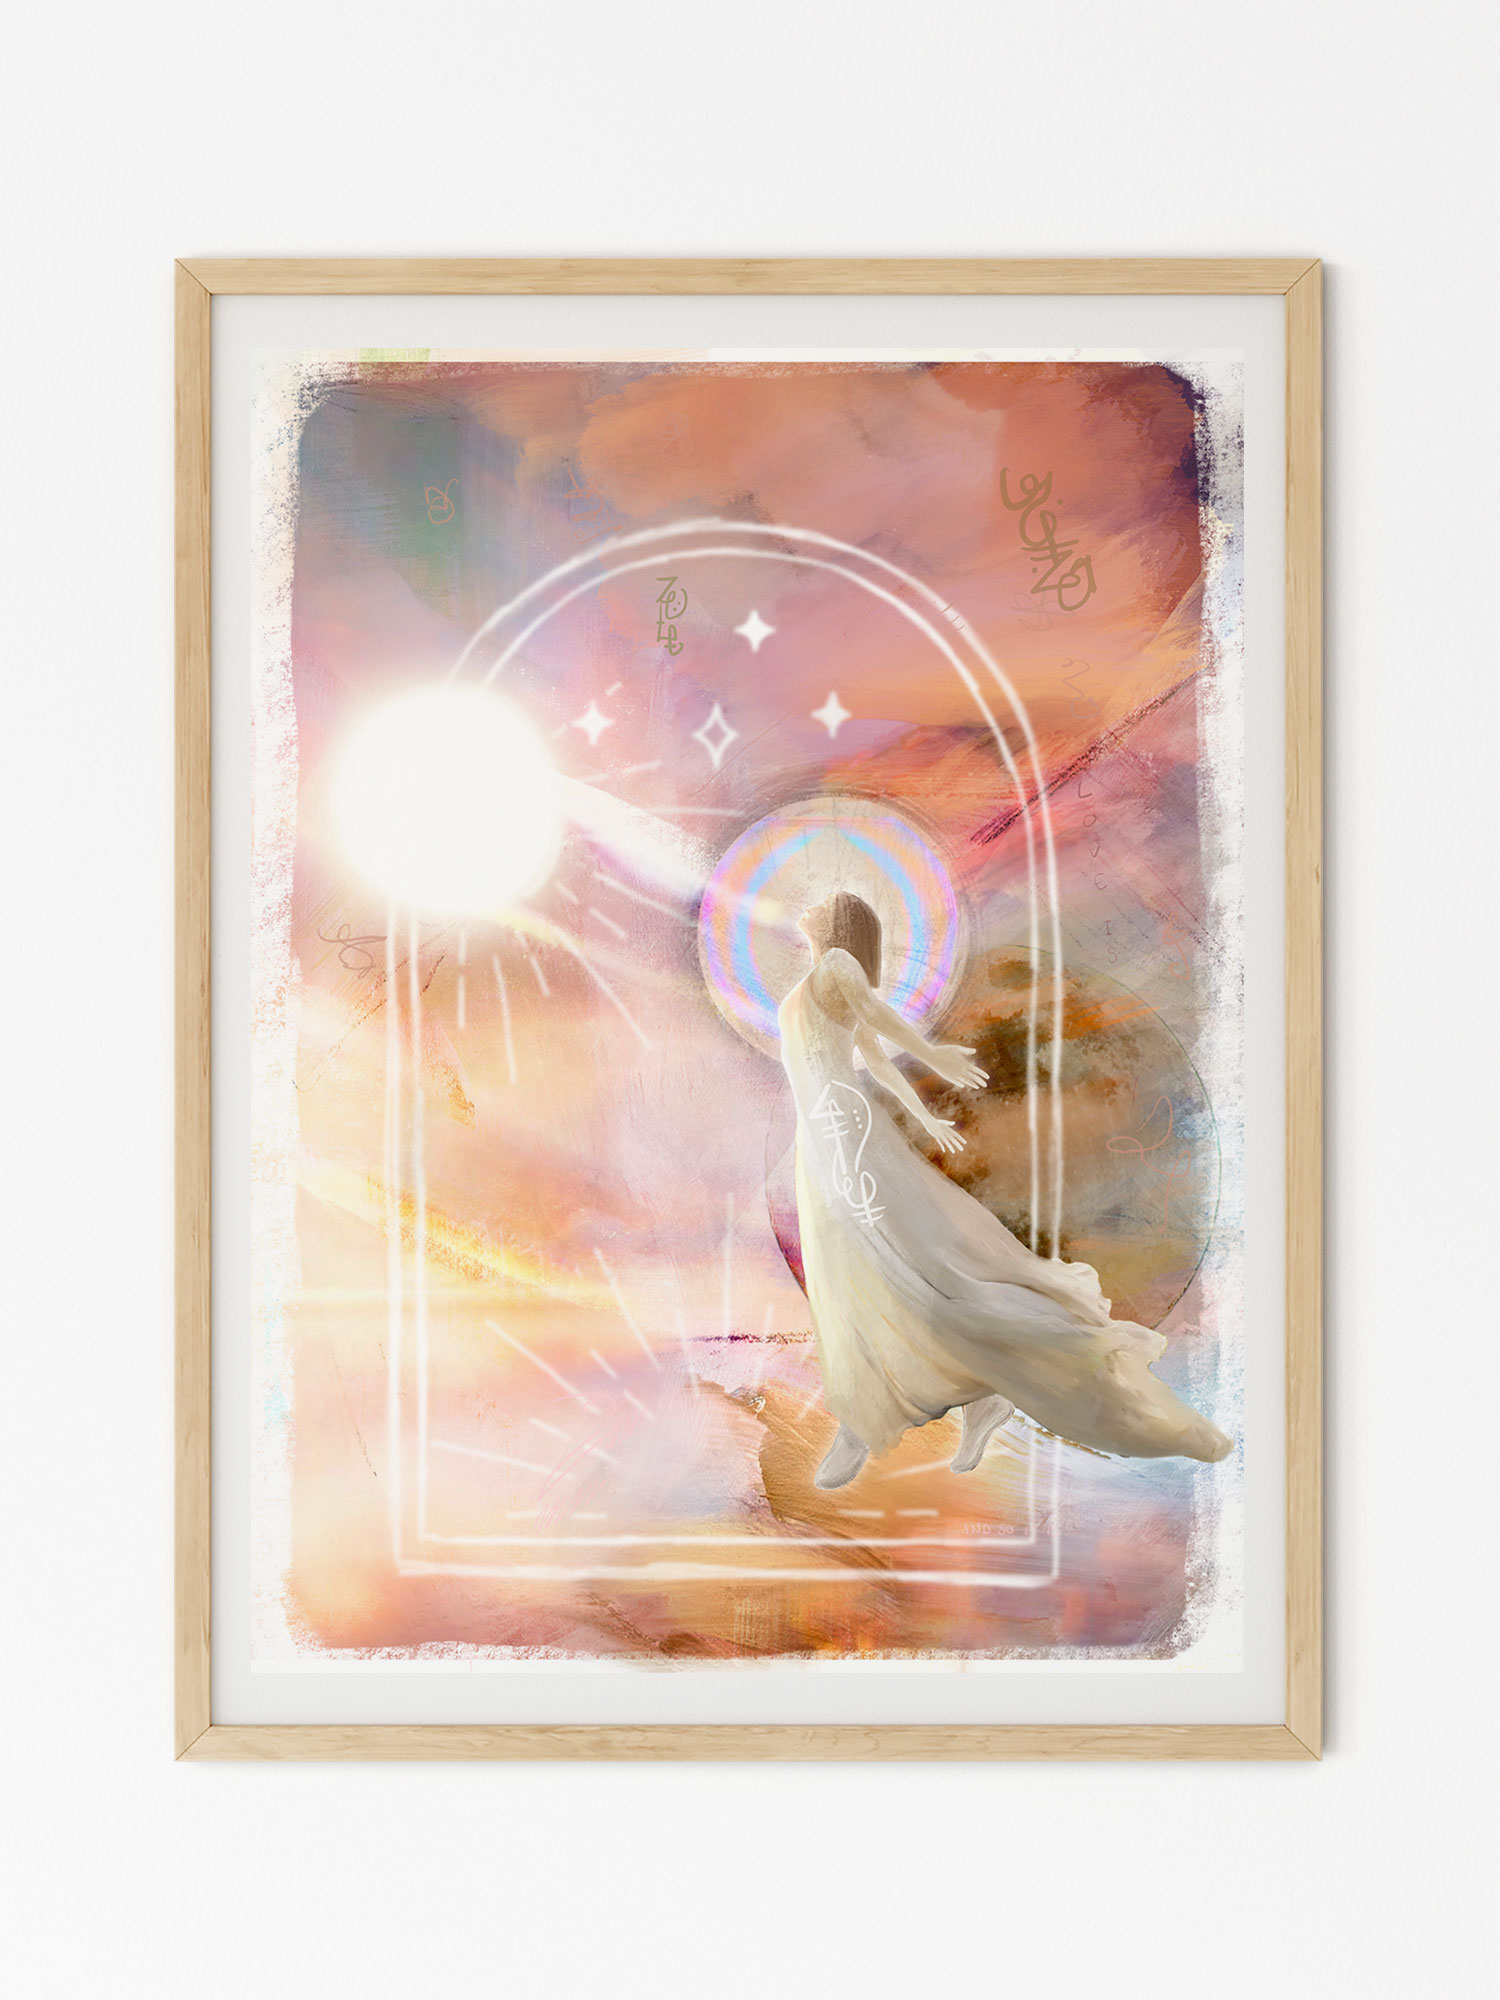 'Guided by Light' print by Frances Verbeek